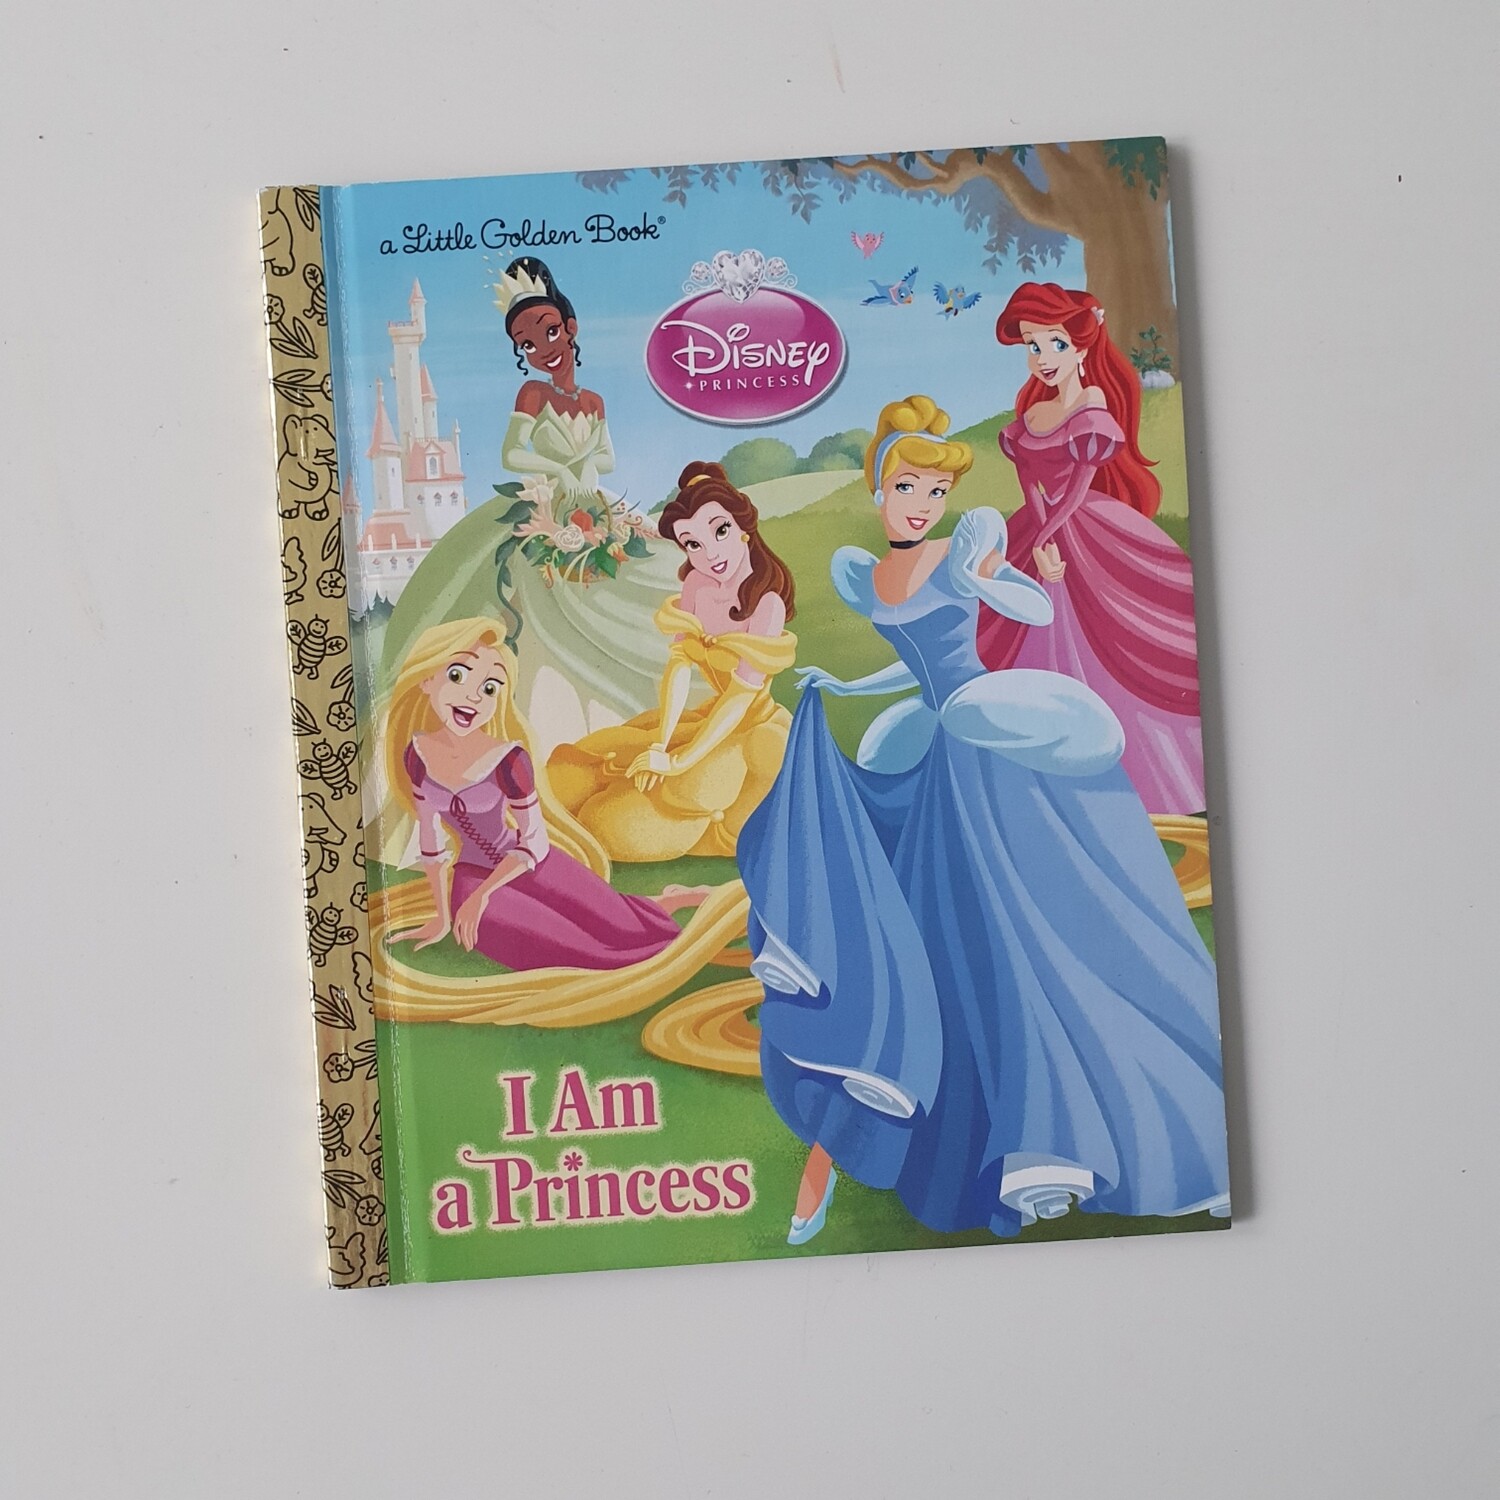 I am a Princess Notebook - board book will come with metal book corners included - No original book pages